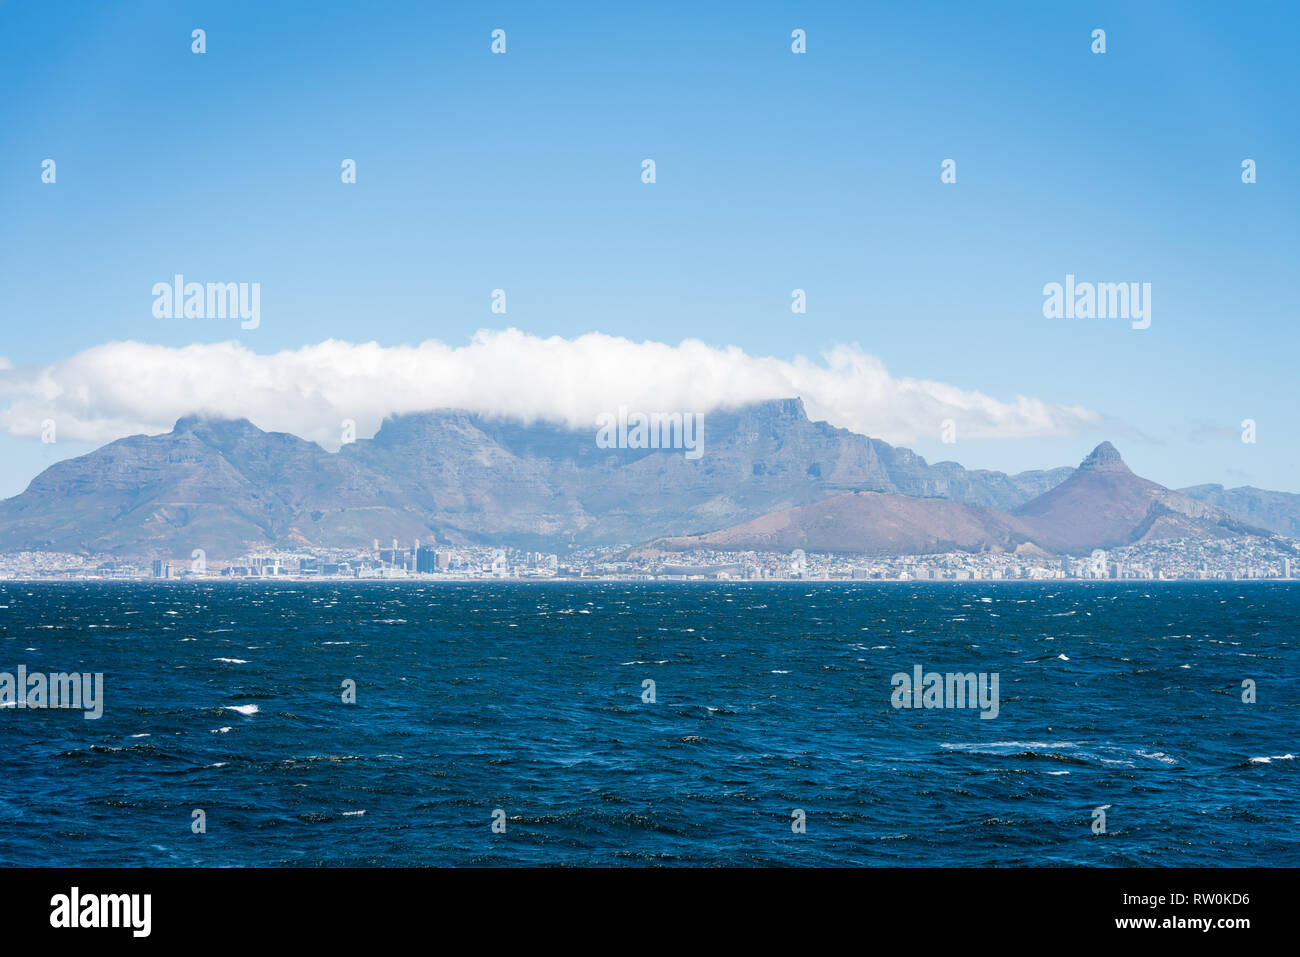 View of Cape town and mountains from the boat heading back from Robben Island, Cape Town, South Africa Stock Photo